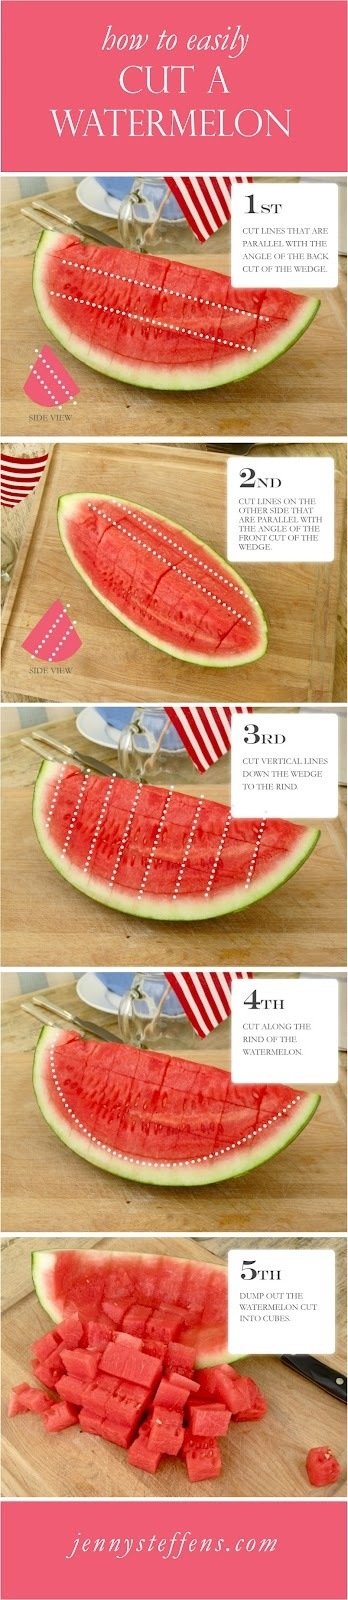 Hack #26: Another perfect way to cut a watermelon